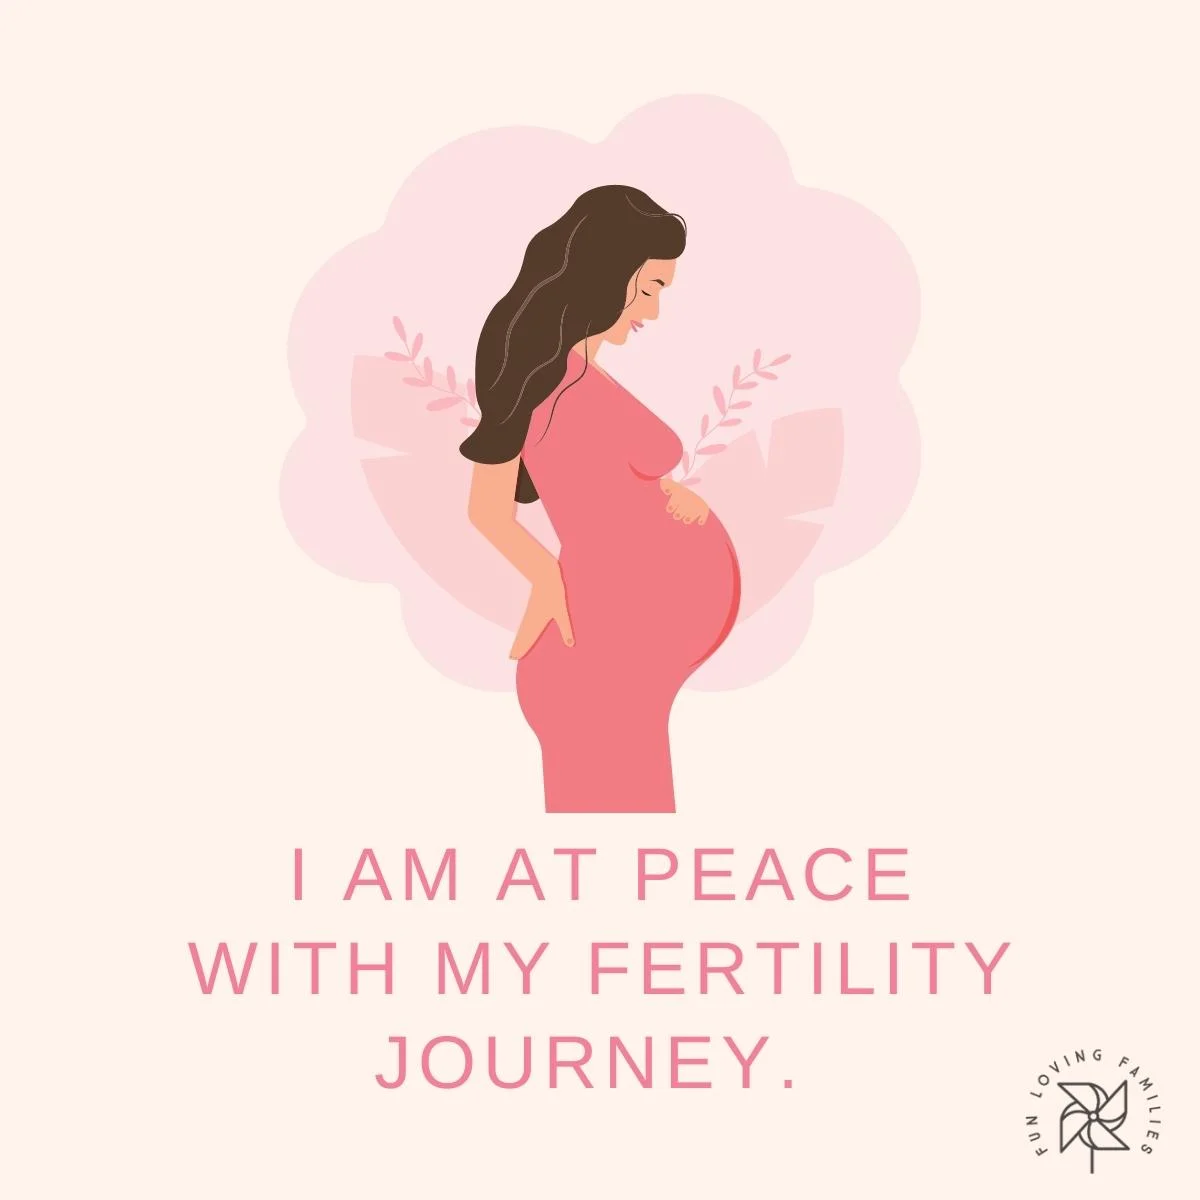 I am at peace with my fertility journey affirmation